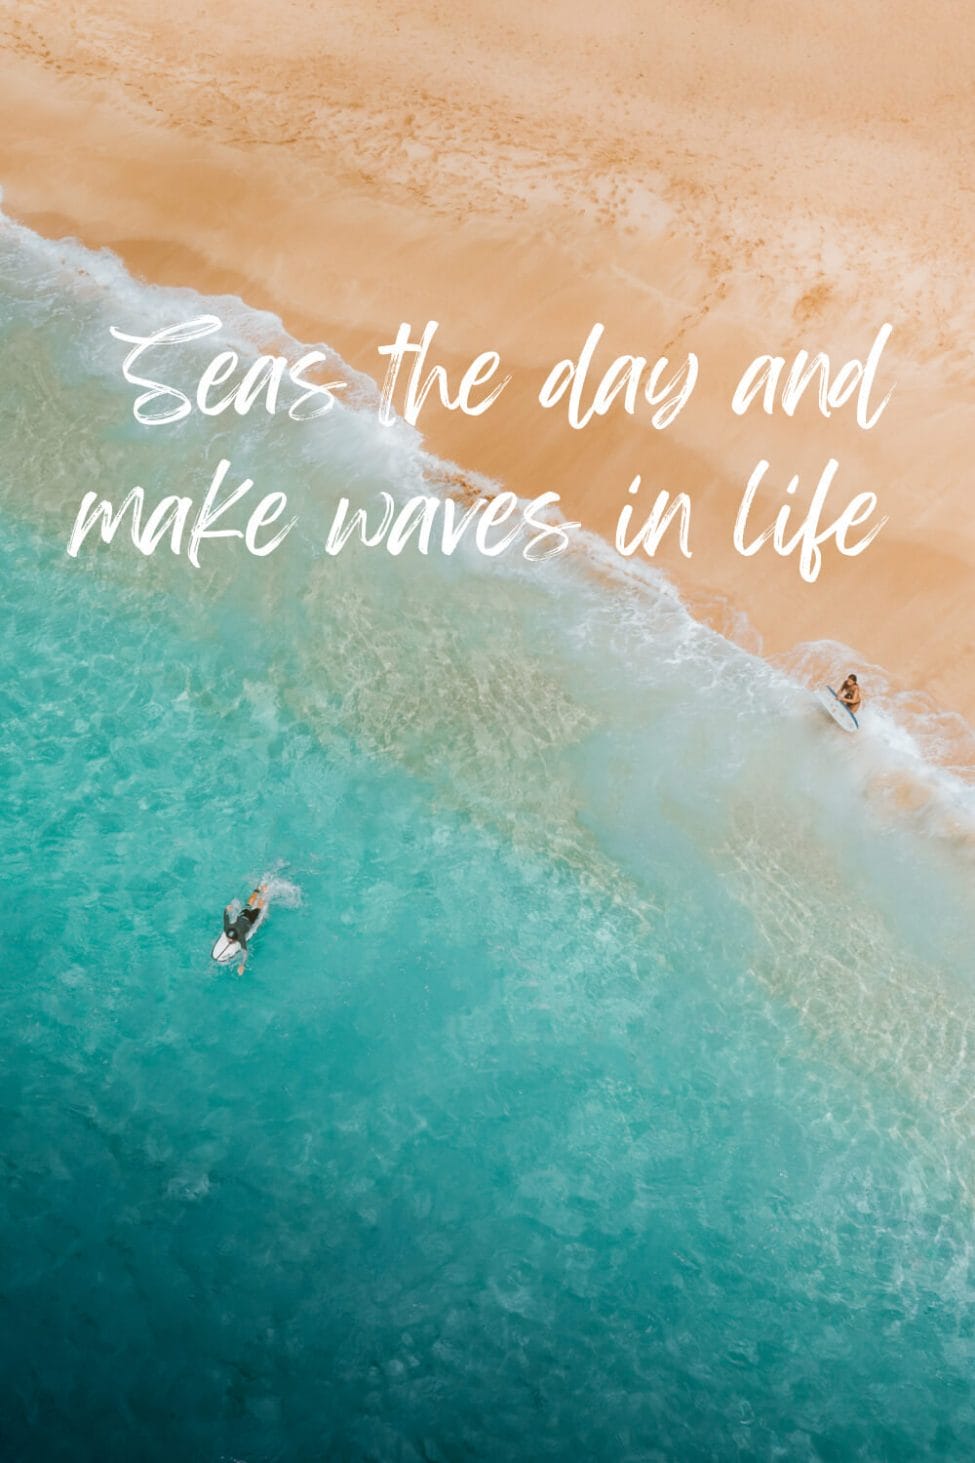 Seas the day and make waves in life